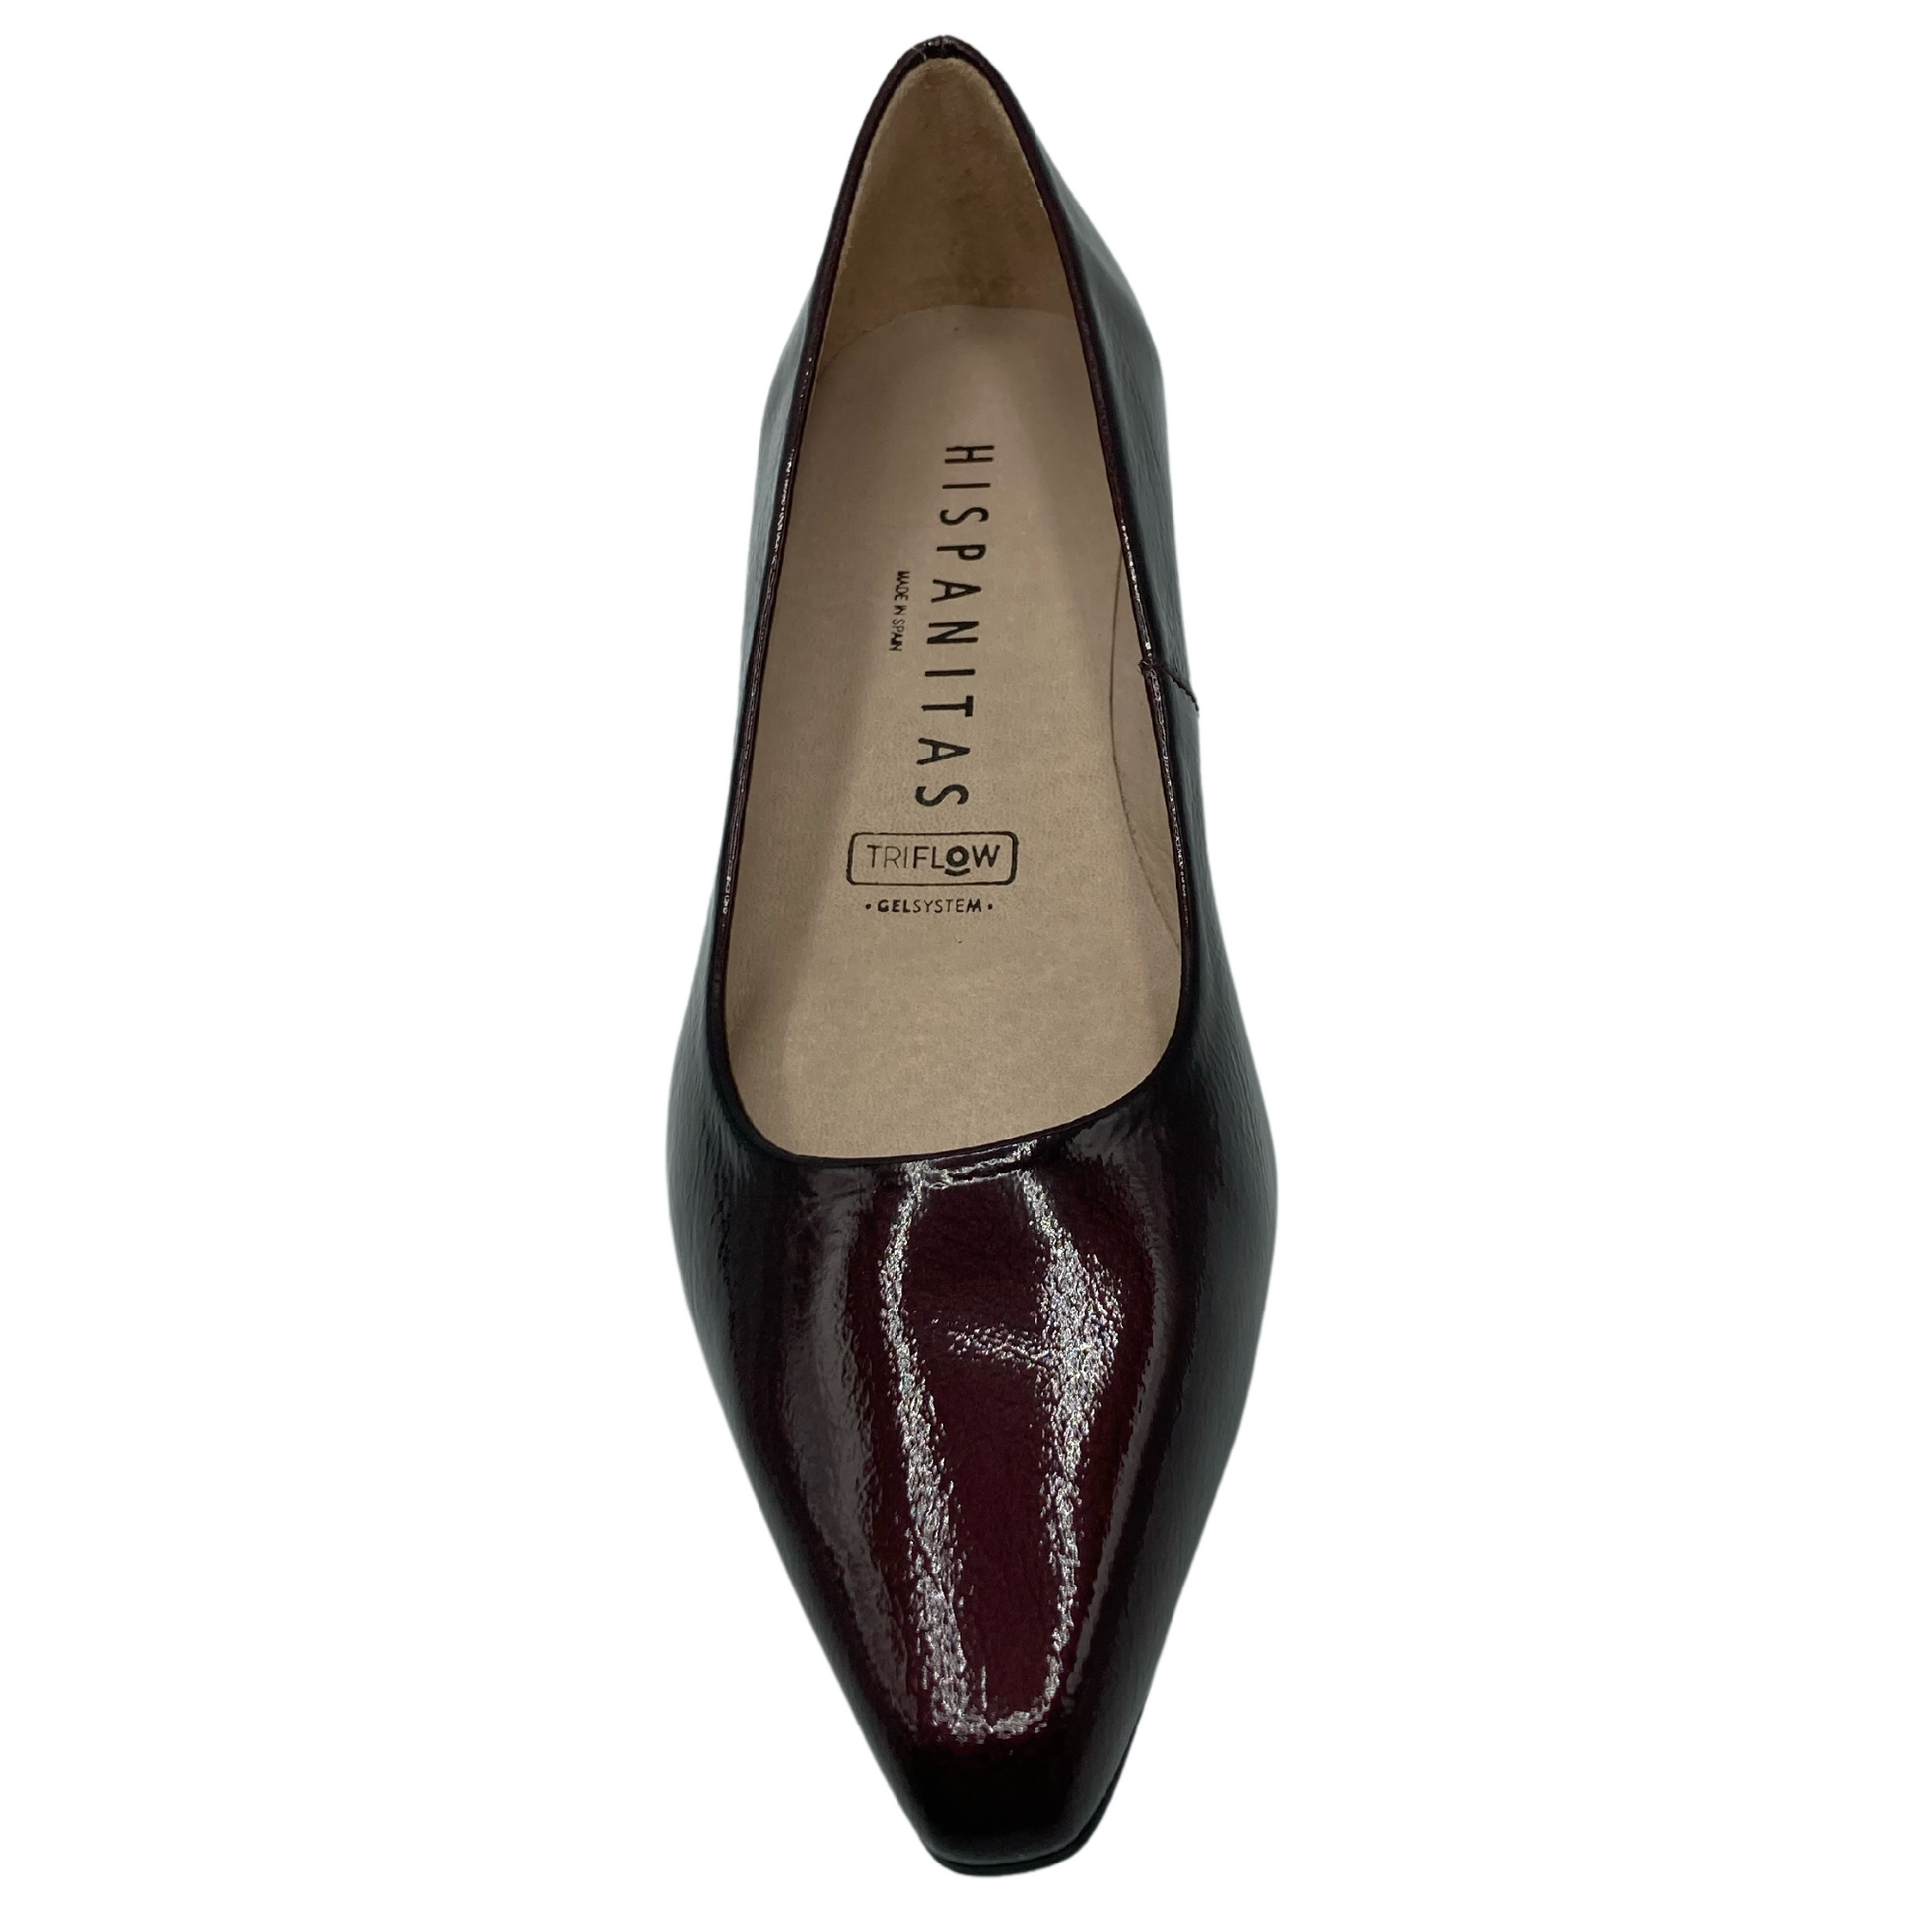 Top view of wine patent leather pointed toe pump with beige leather lining